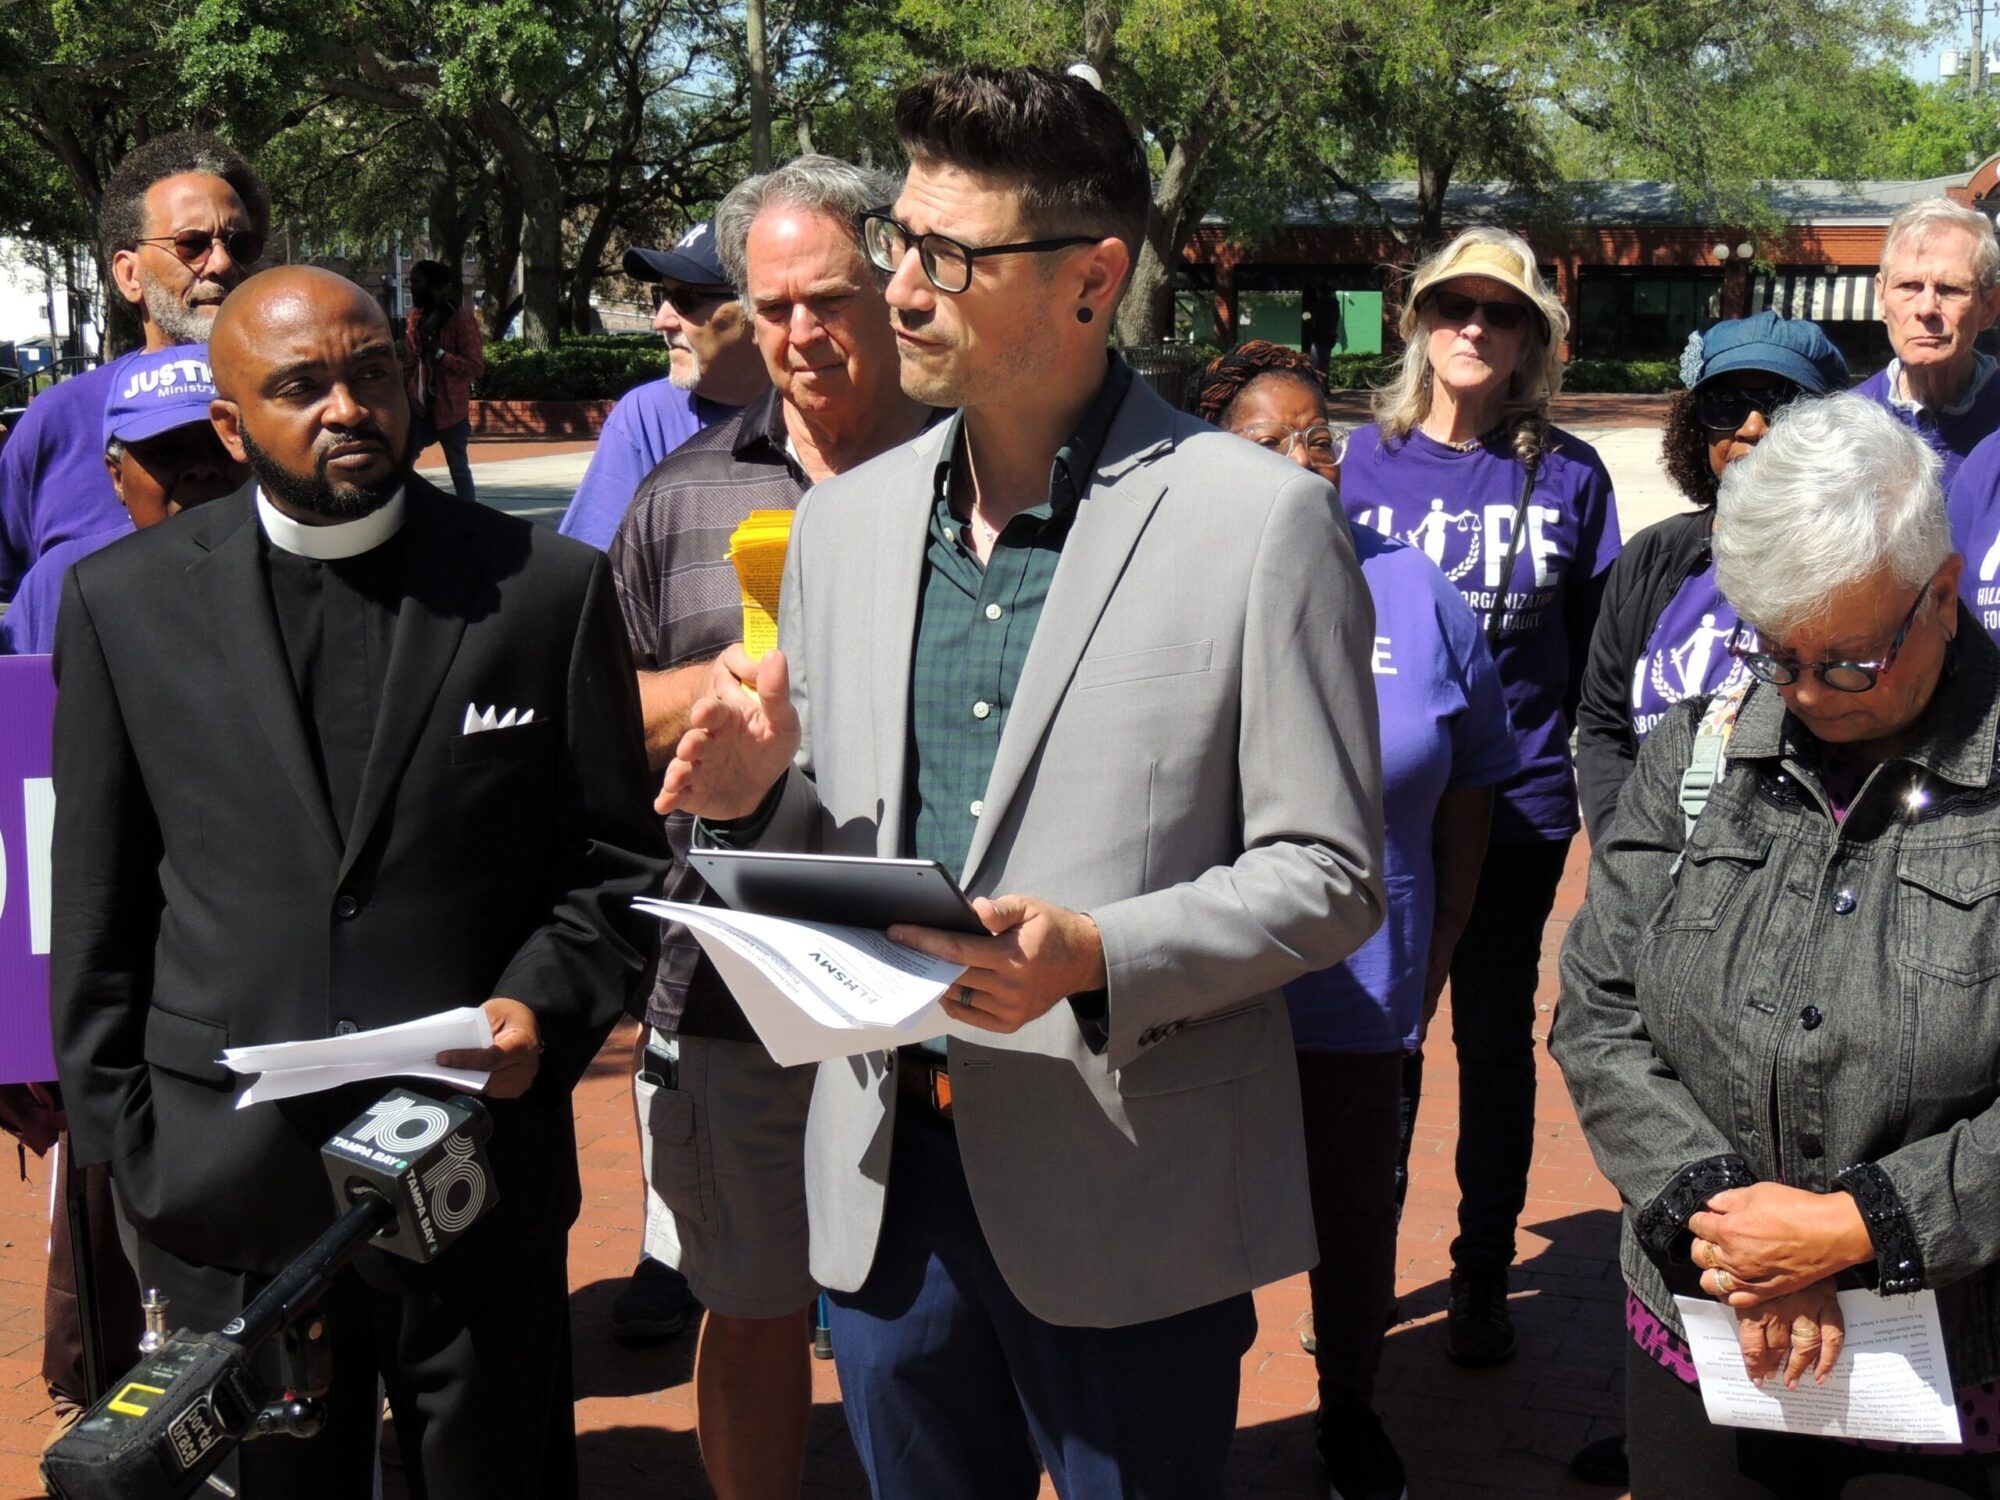 Hillsborough County faith leaders call for reduced penalties for some driving misdemeanors